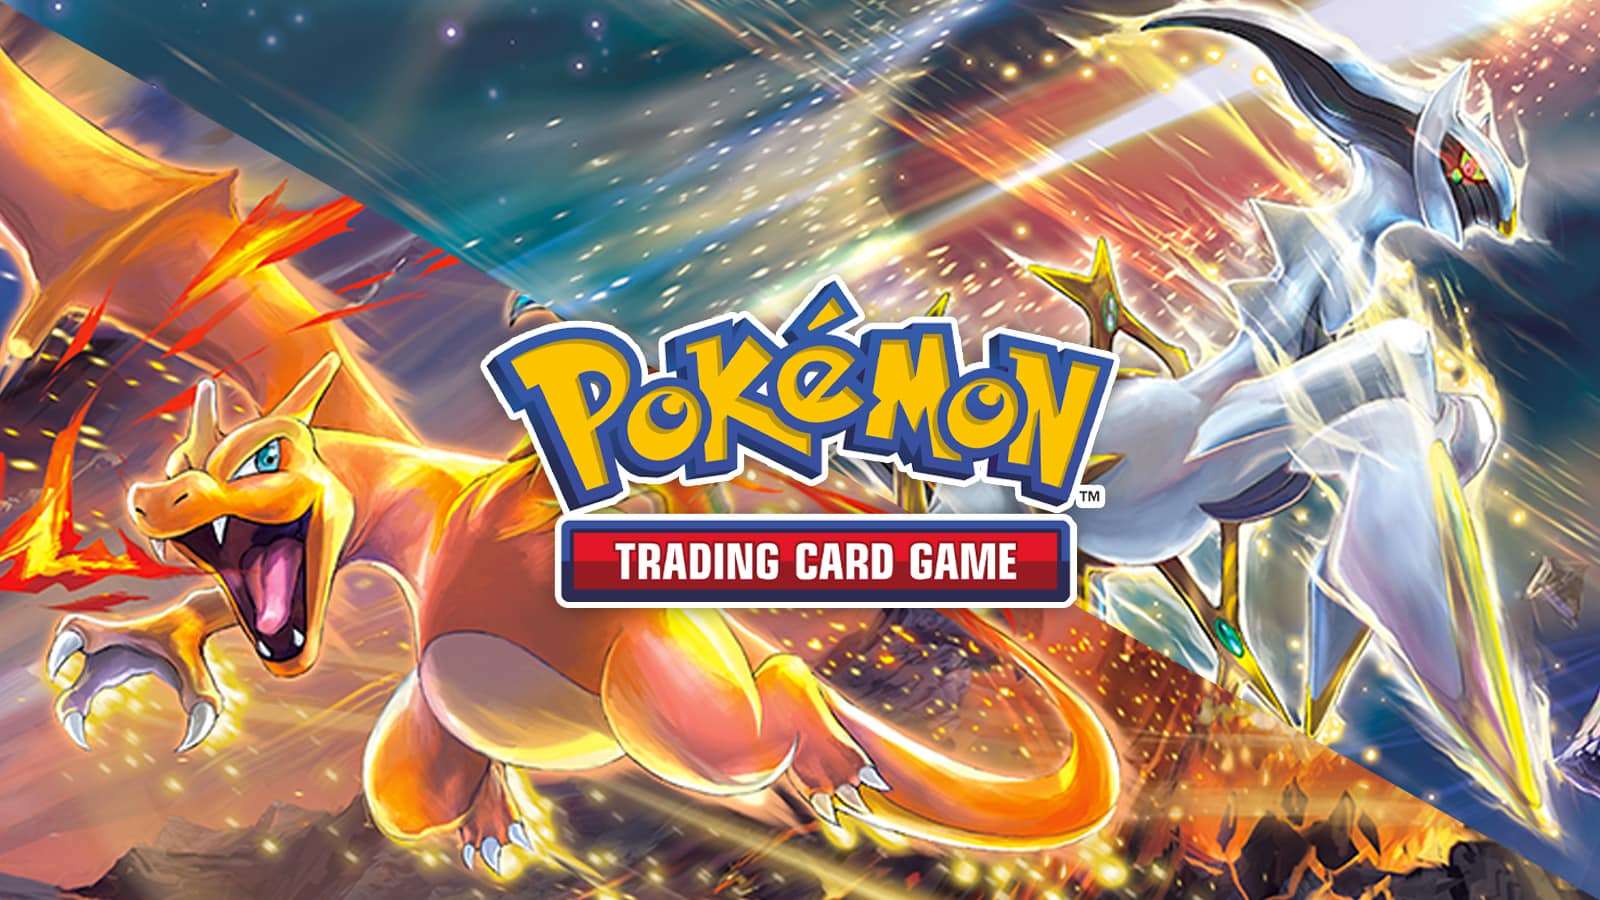 There's A New Pokemon Card Type, And It Looks Extremely Powerful